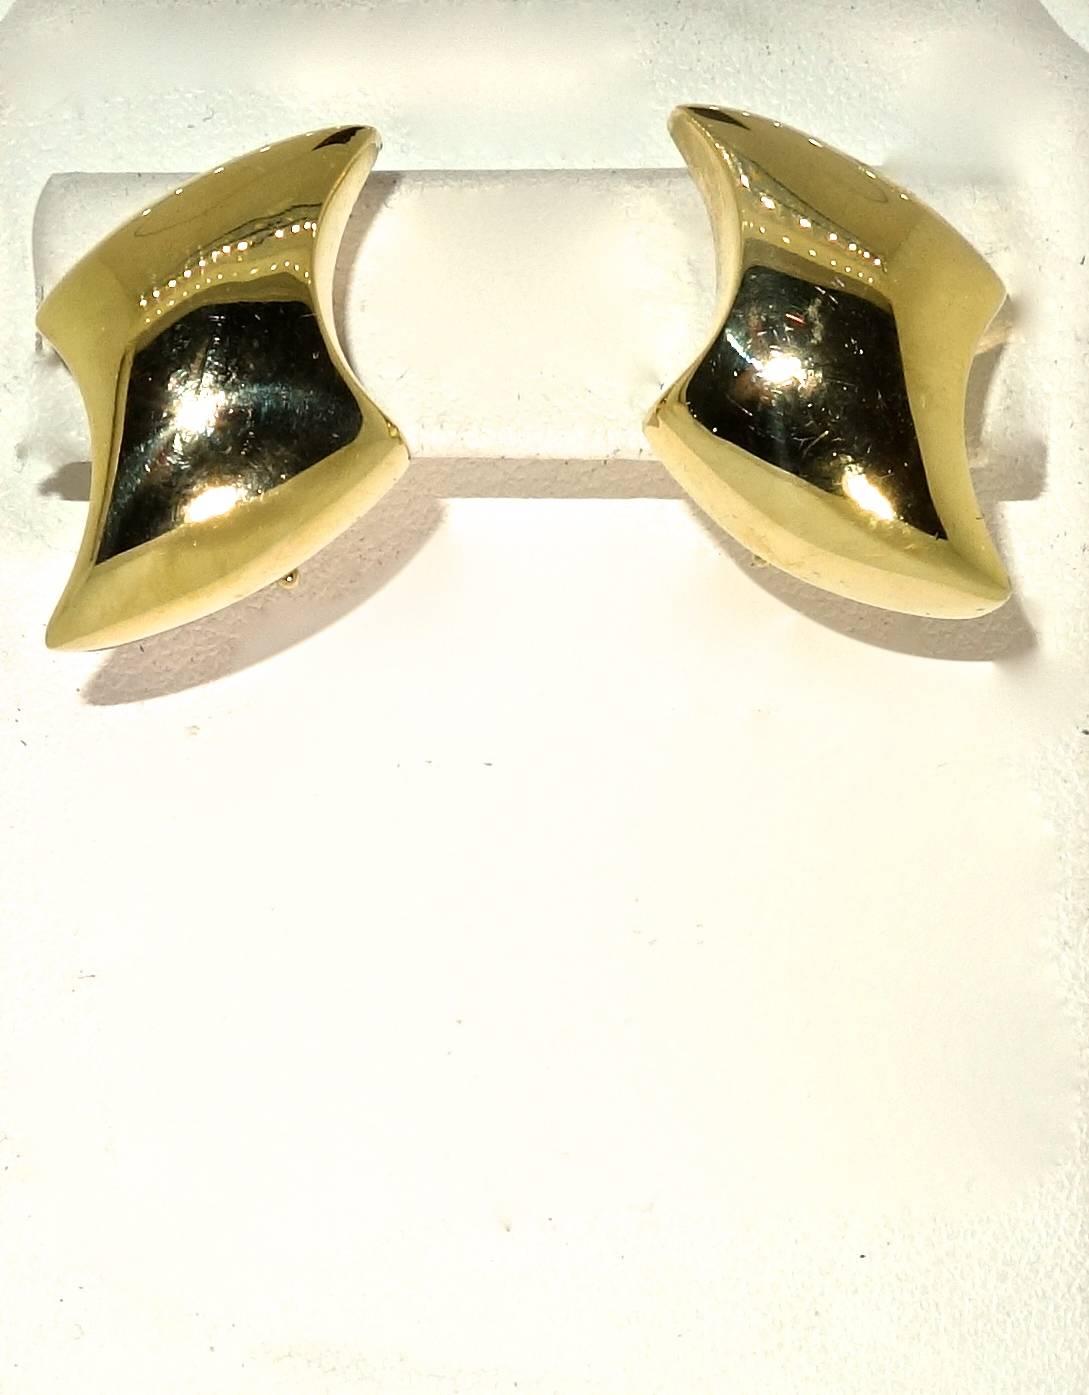 An unusual twist pattern describes these very wearable 18K gold earrings.  They weigh 14.77 grams